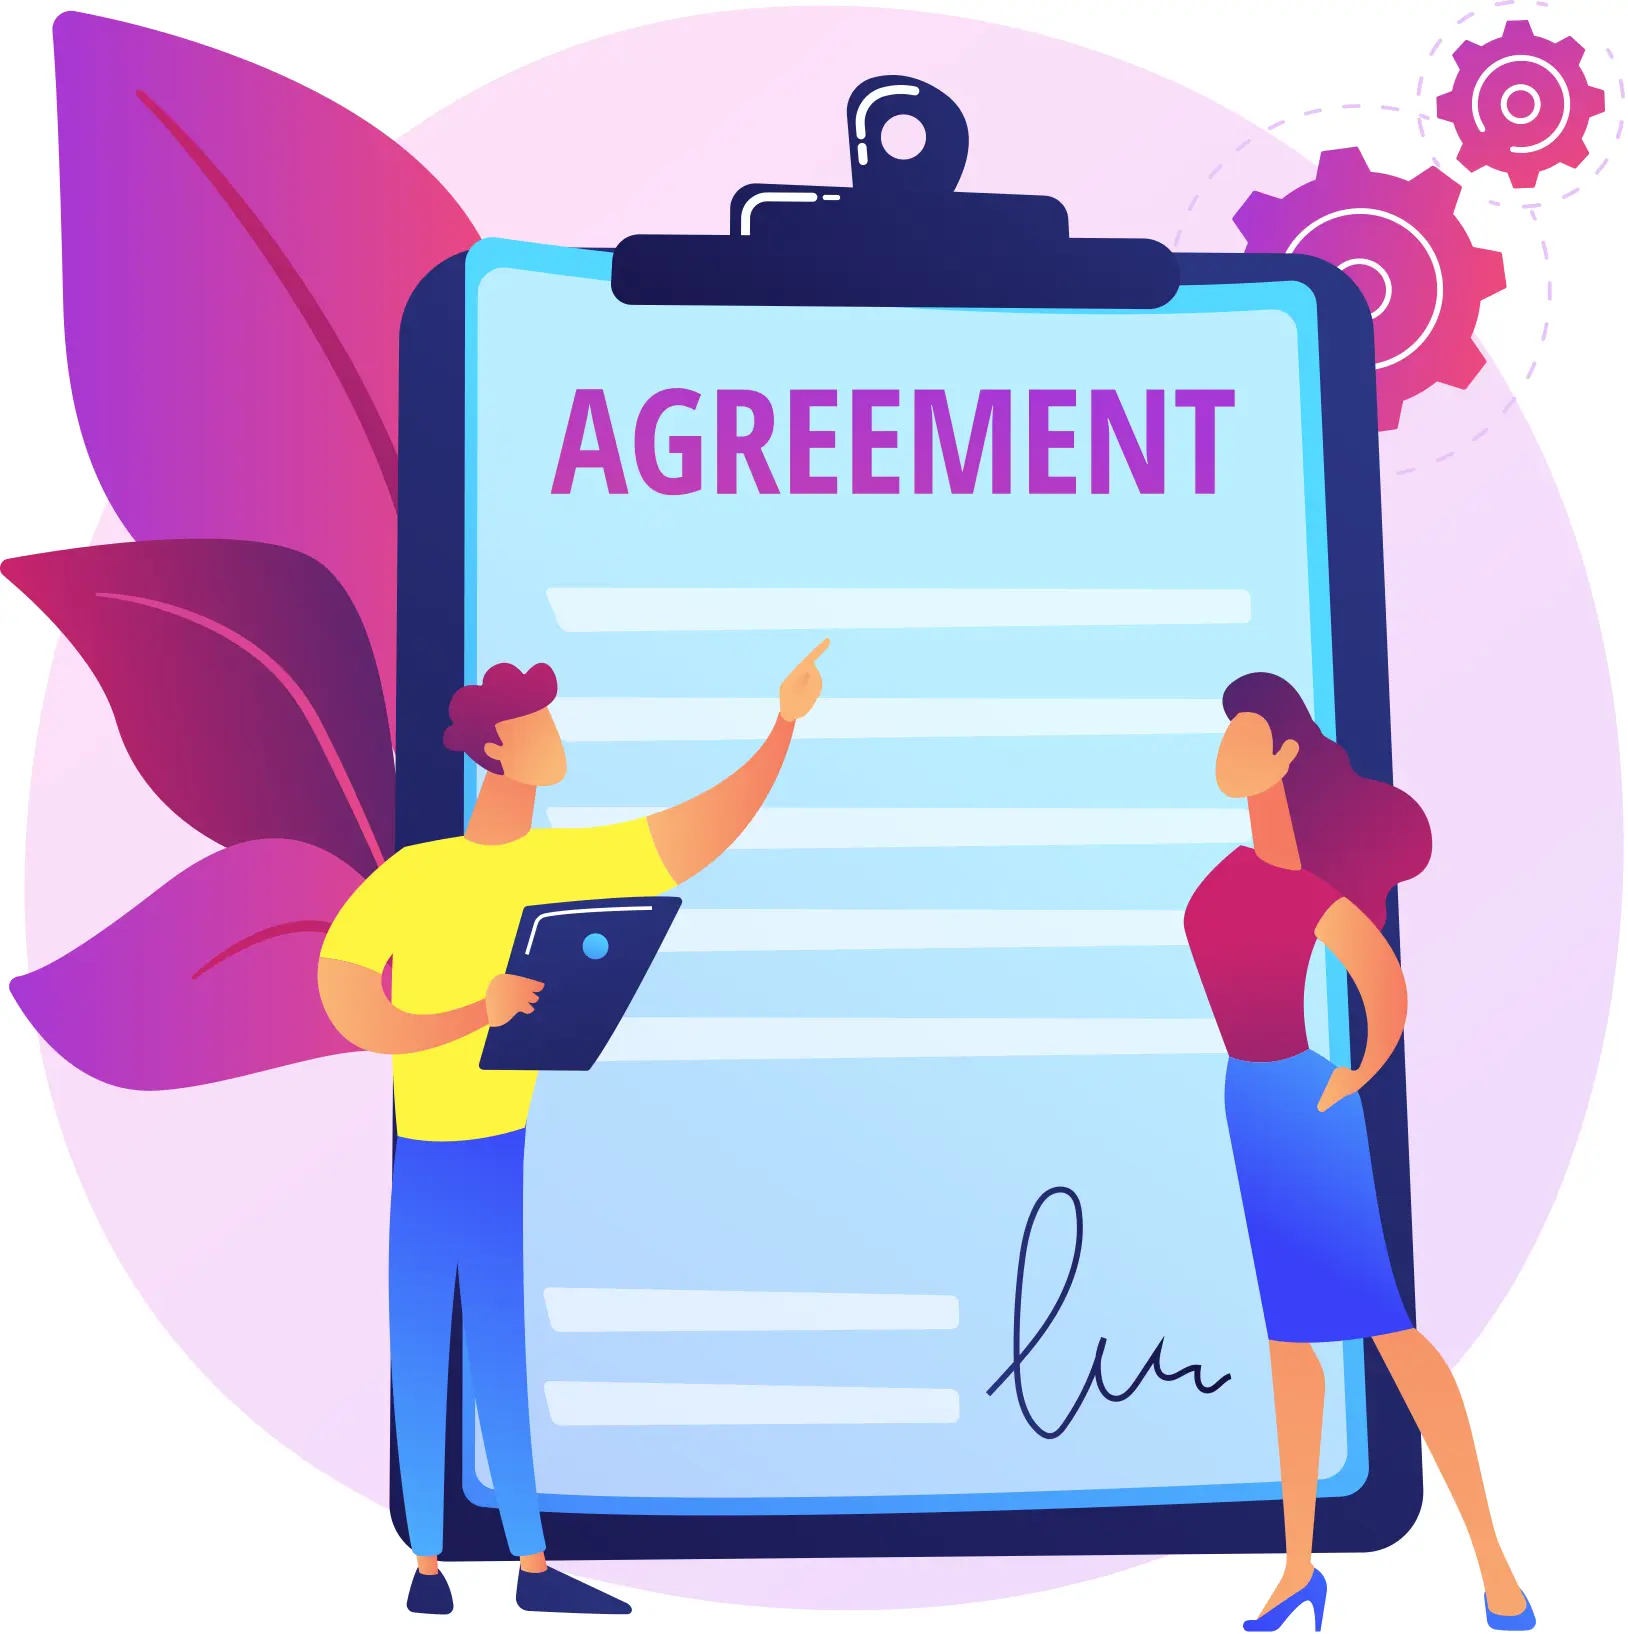 Modifications to the Agreement Image